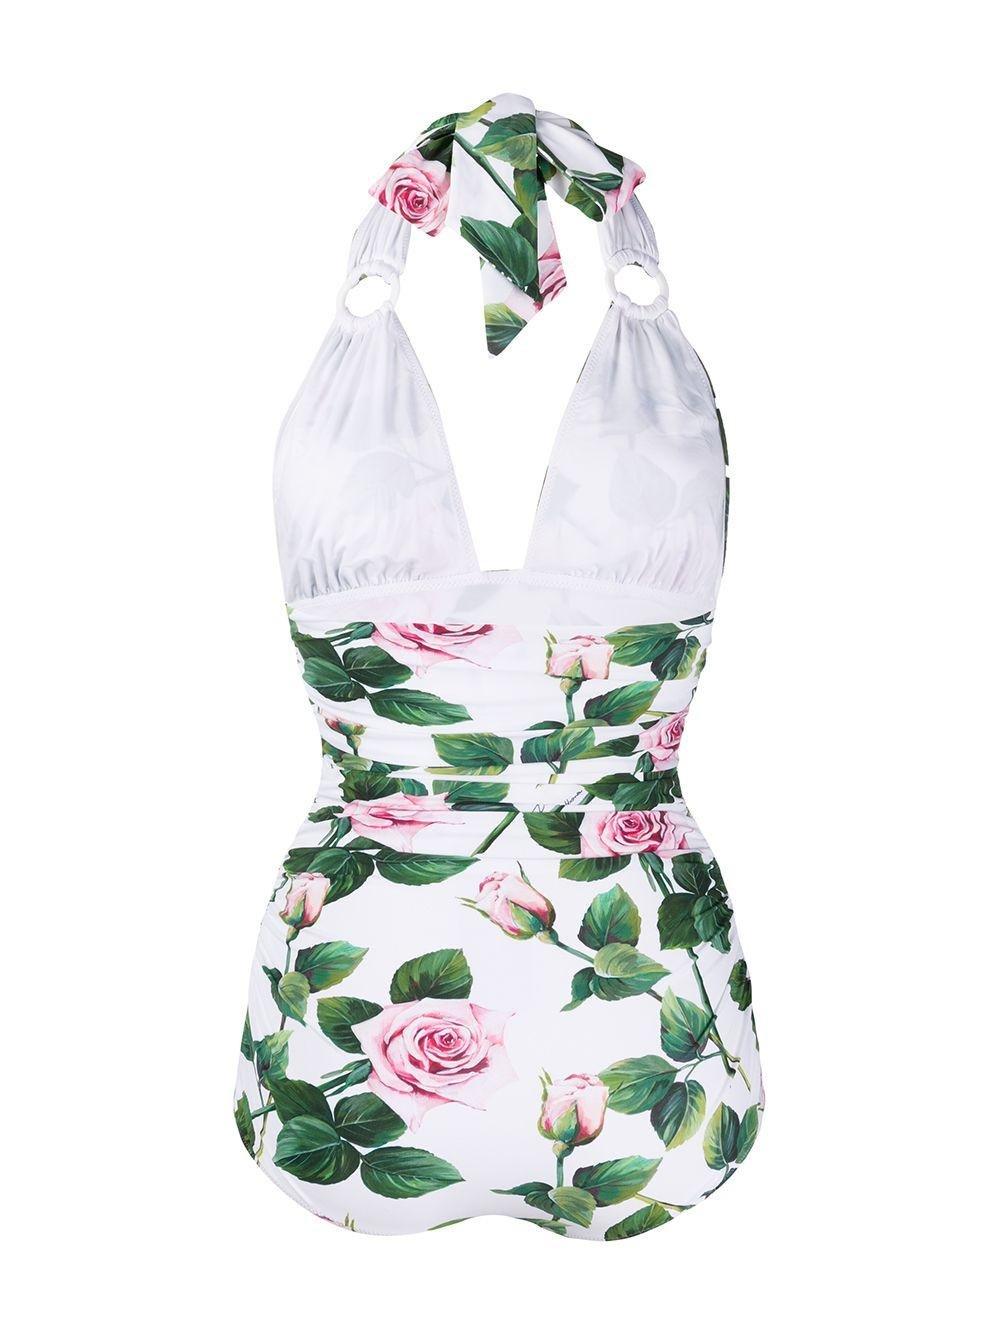 Gorgeous brand new with tags, 100% Authentic Dolce & Gabbana one piece swimsuit bikini. 

Color: White with Pink Roses print

Model: Bikini swimsuit one piece

Material: 25% Elastane, 75% Polyamide

Logo detailing

Made in Italy


Size: IT2